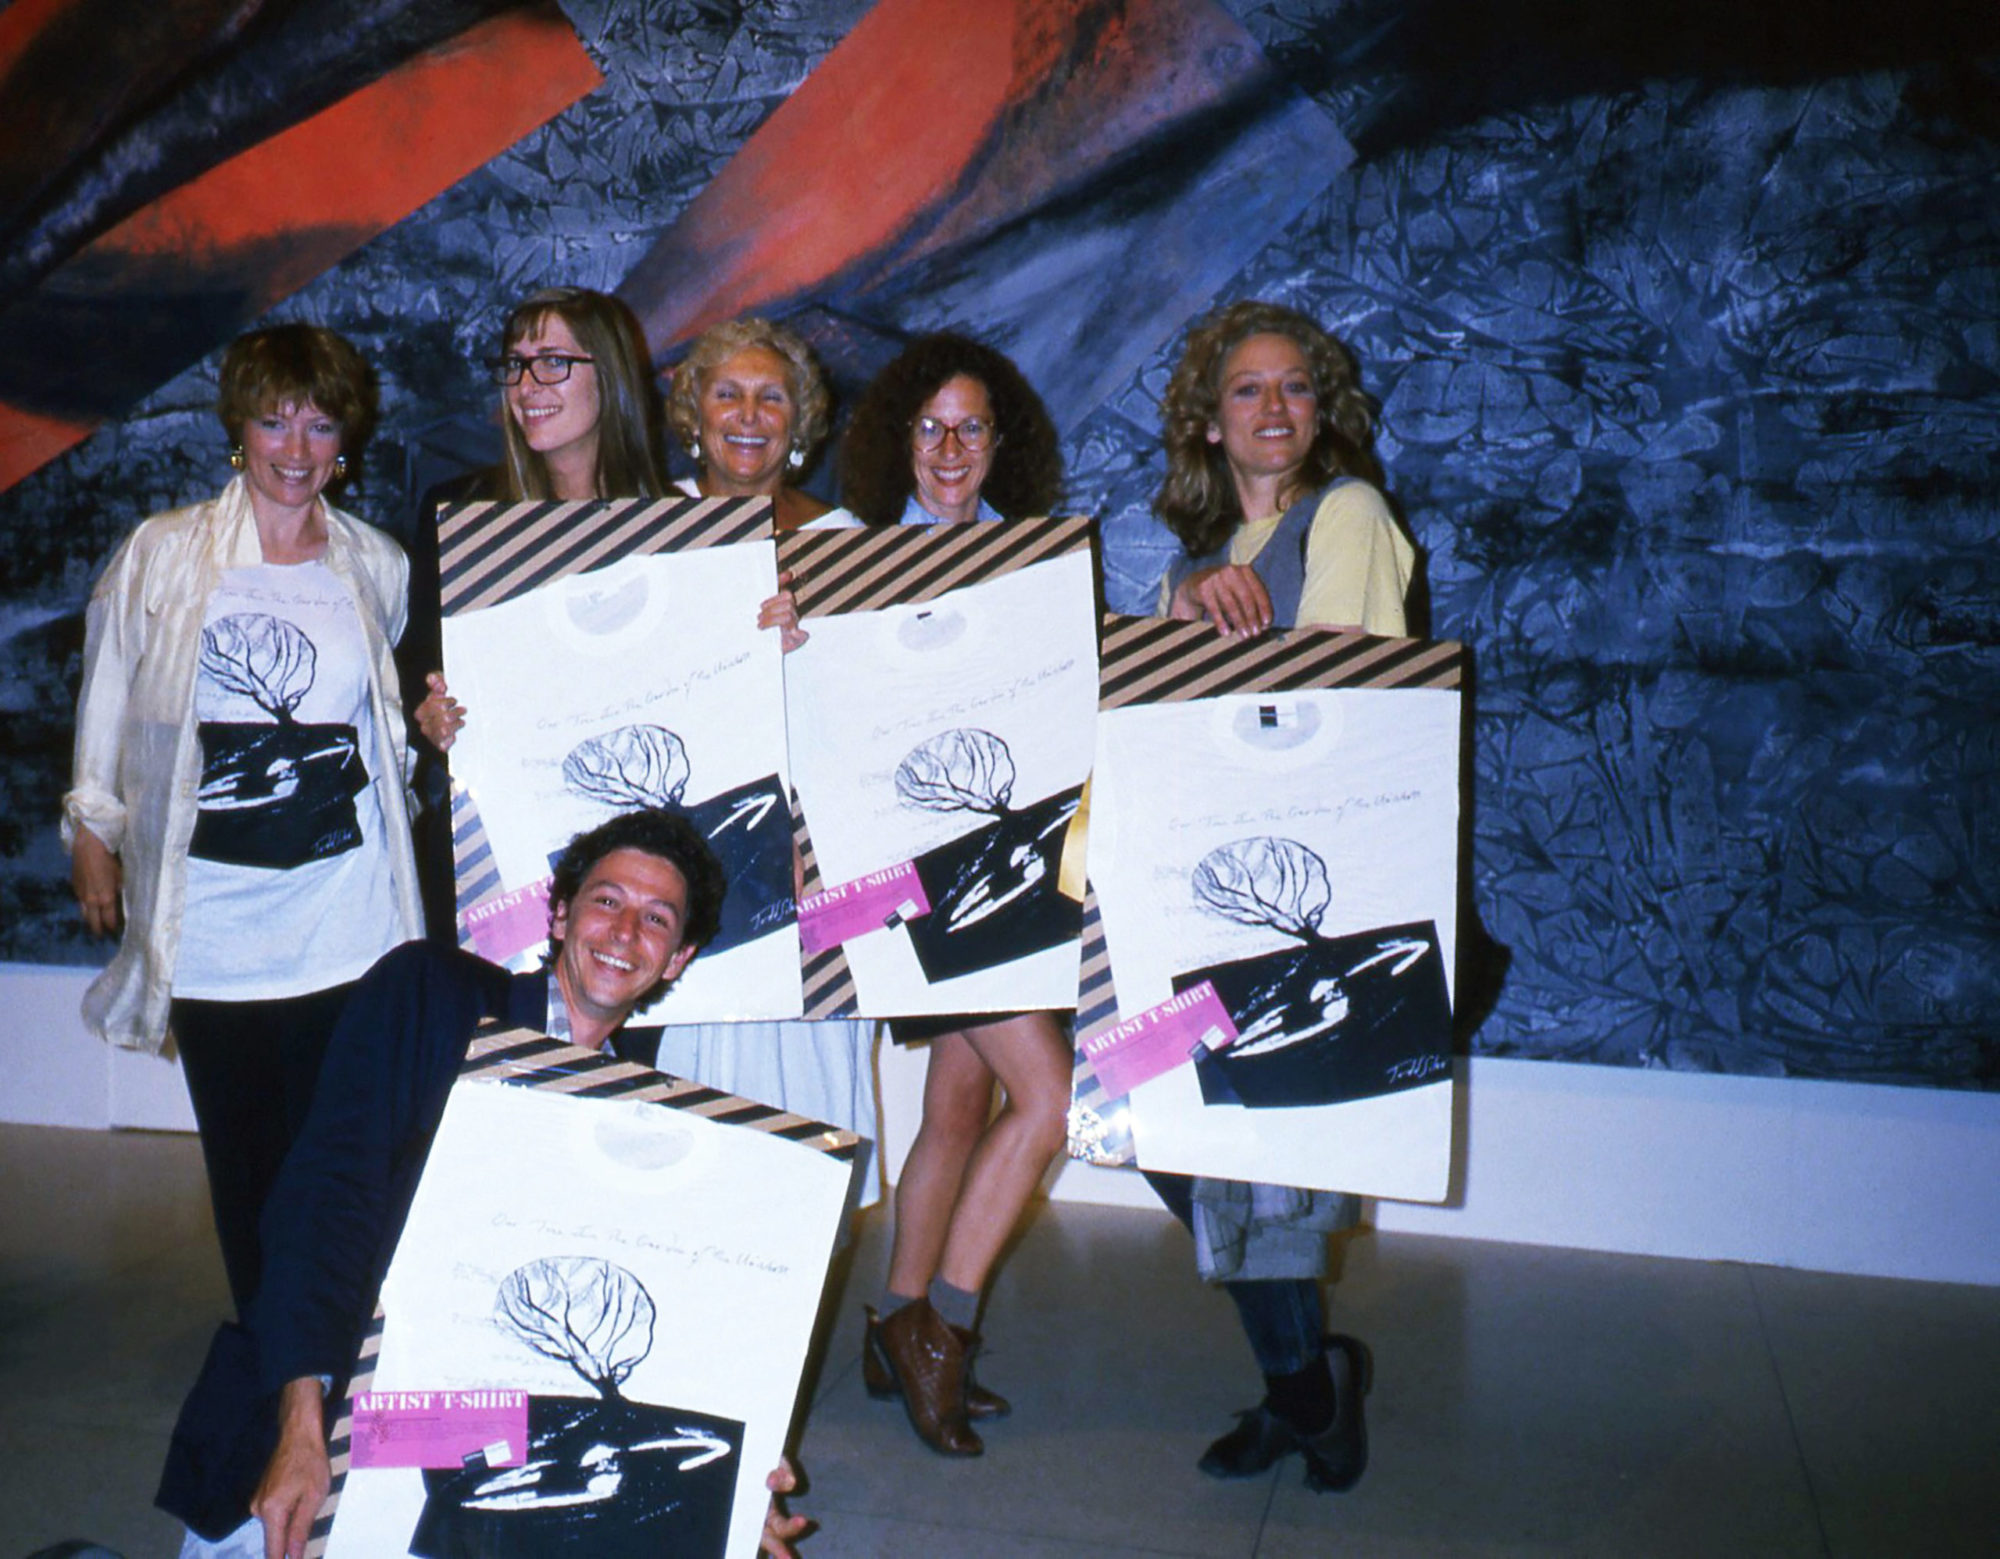 A color photograph of a group of people holding signs. Five women stand holding posters with the design of the white tshirt, while one standing on the left wears the shirt. A man kneels in front holding another sign. The poster shows the white shirt on a striped background and over a purple box it reads "Artist T-Shirt".